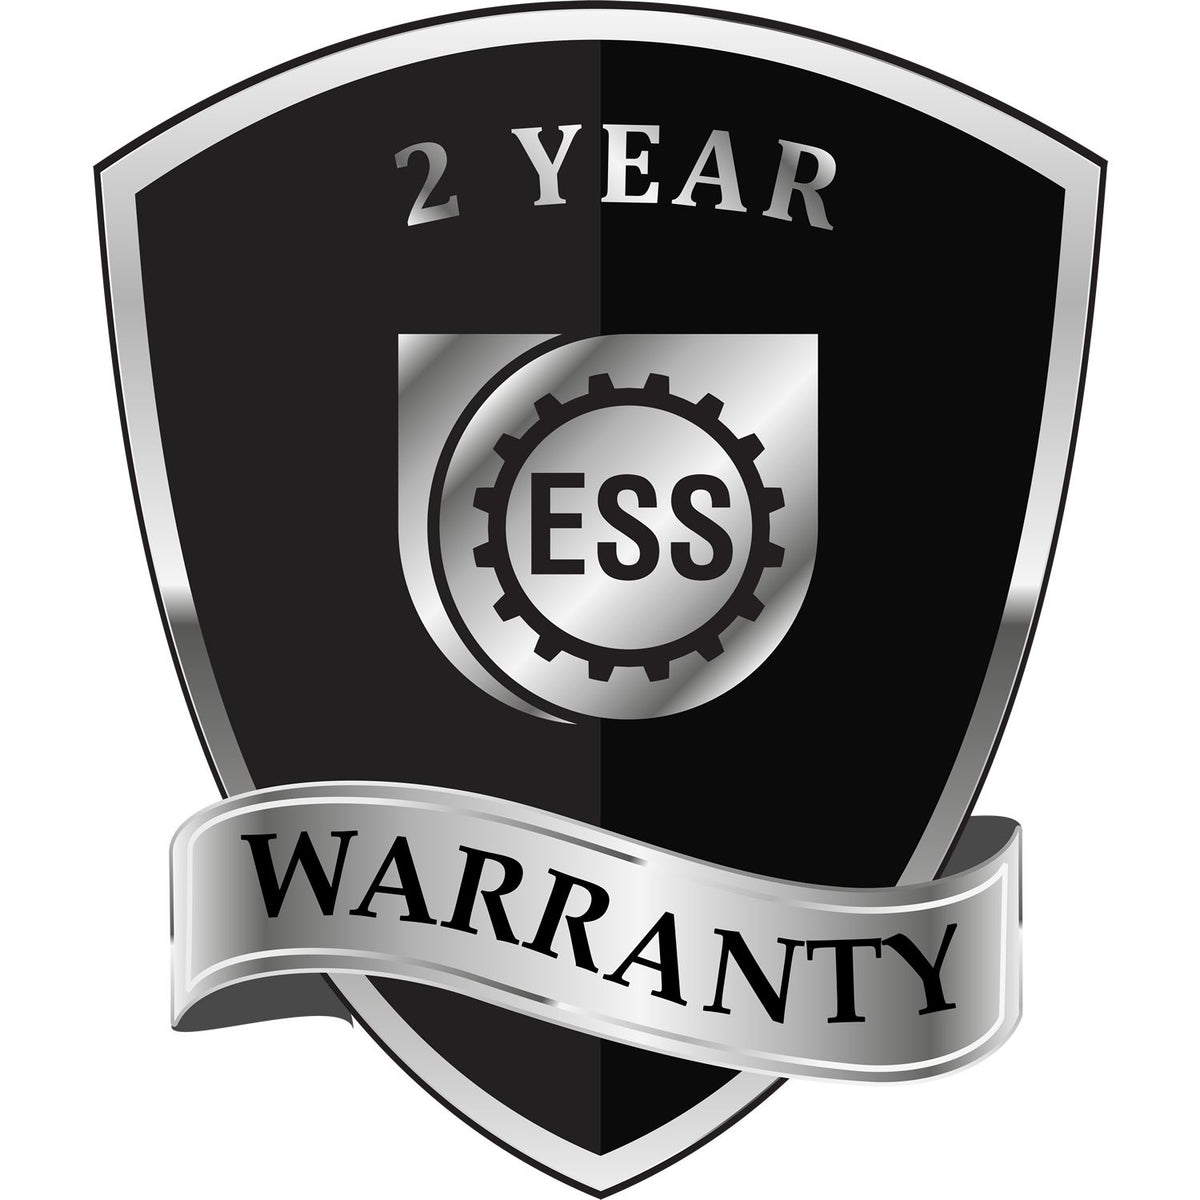 A black and silver badge or emblem showing warranty information for the Hybrid Ohio Engineer Seal